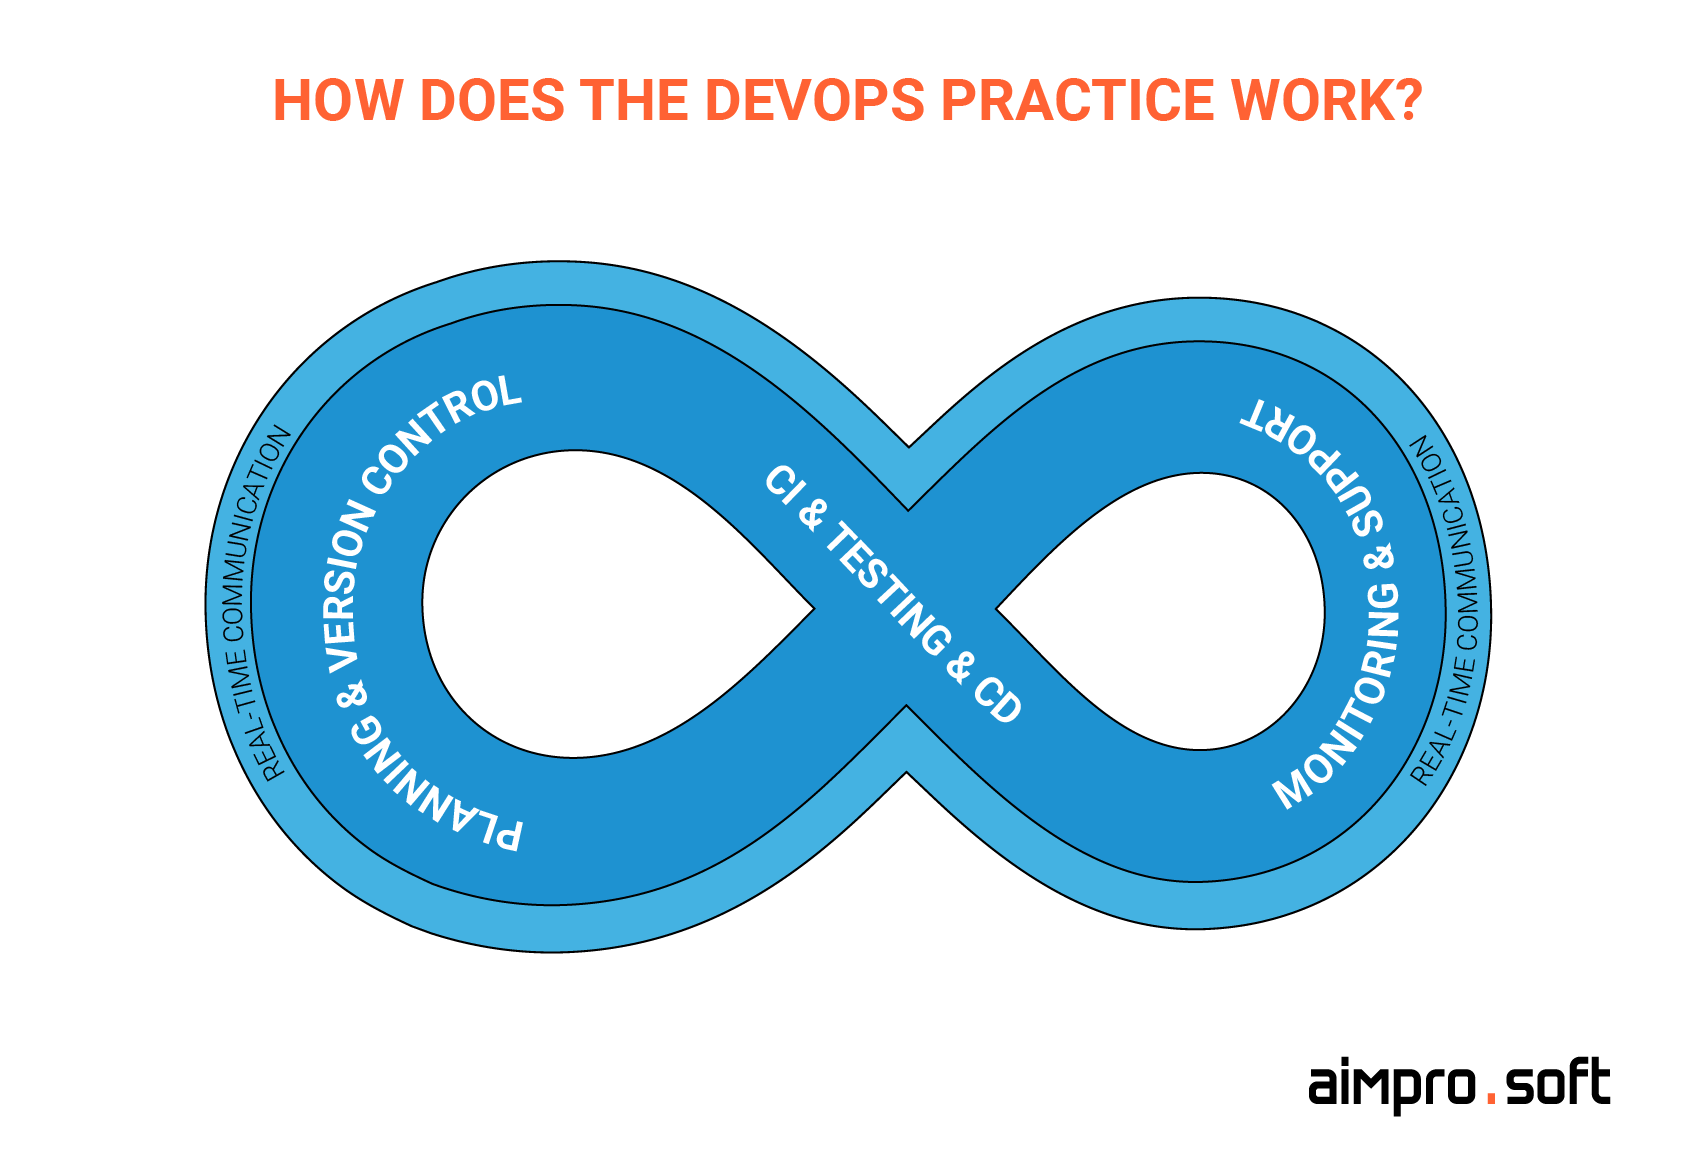 How-does-the-DevOps-practice-work-150x150